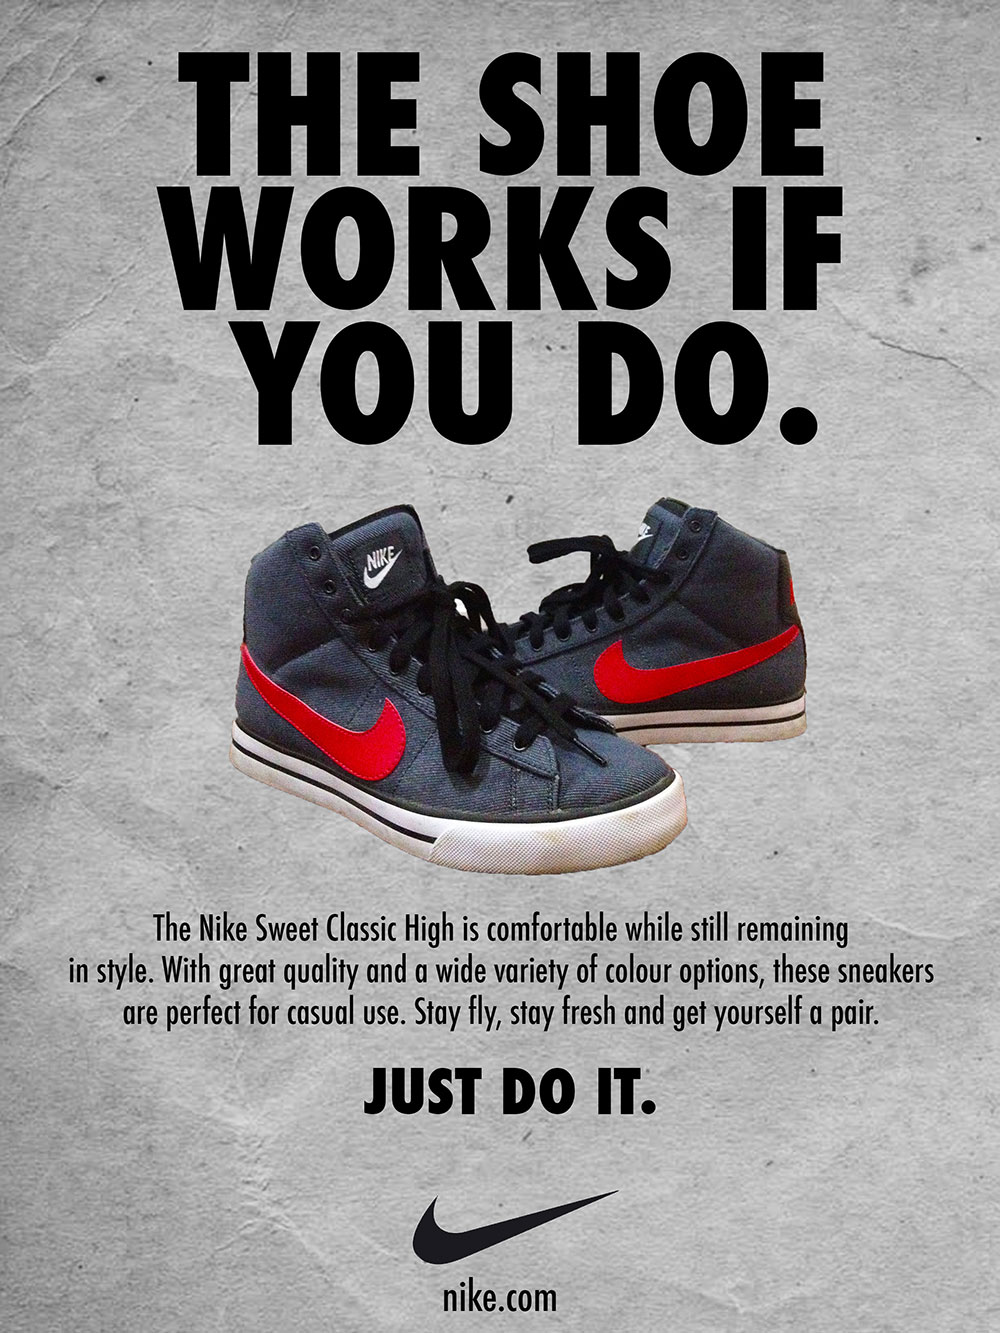 Nike Print Magazine Ads That Boosted The Brand's Popularity